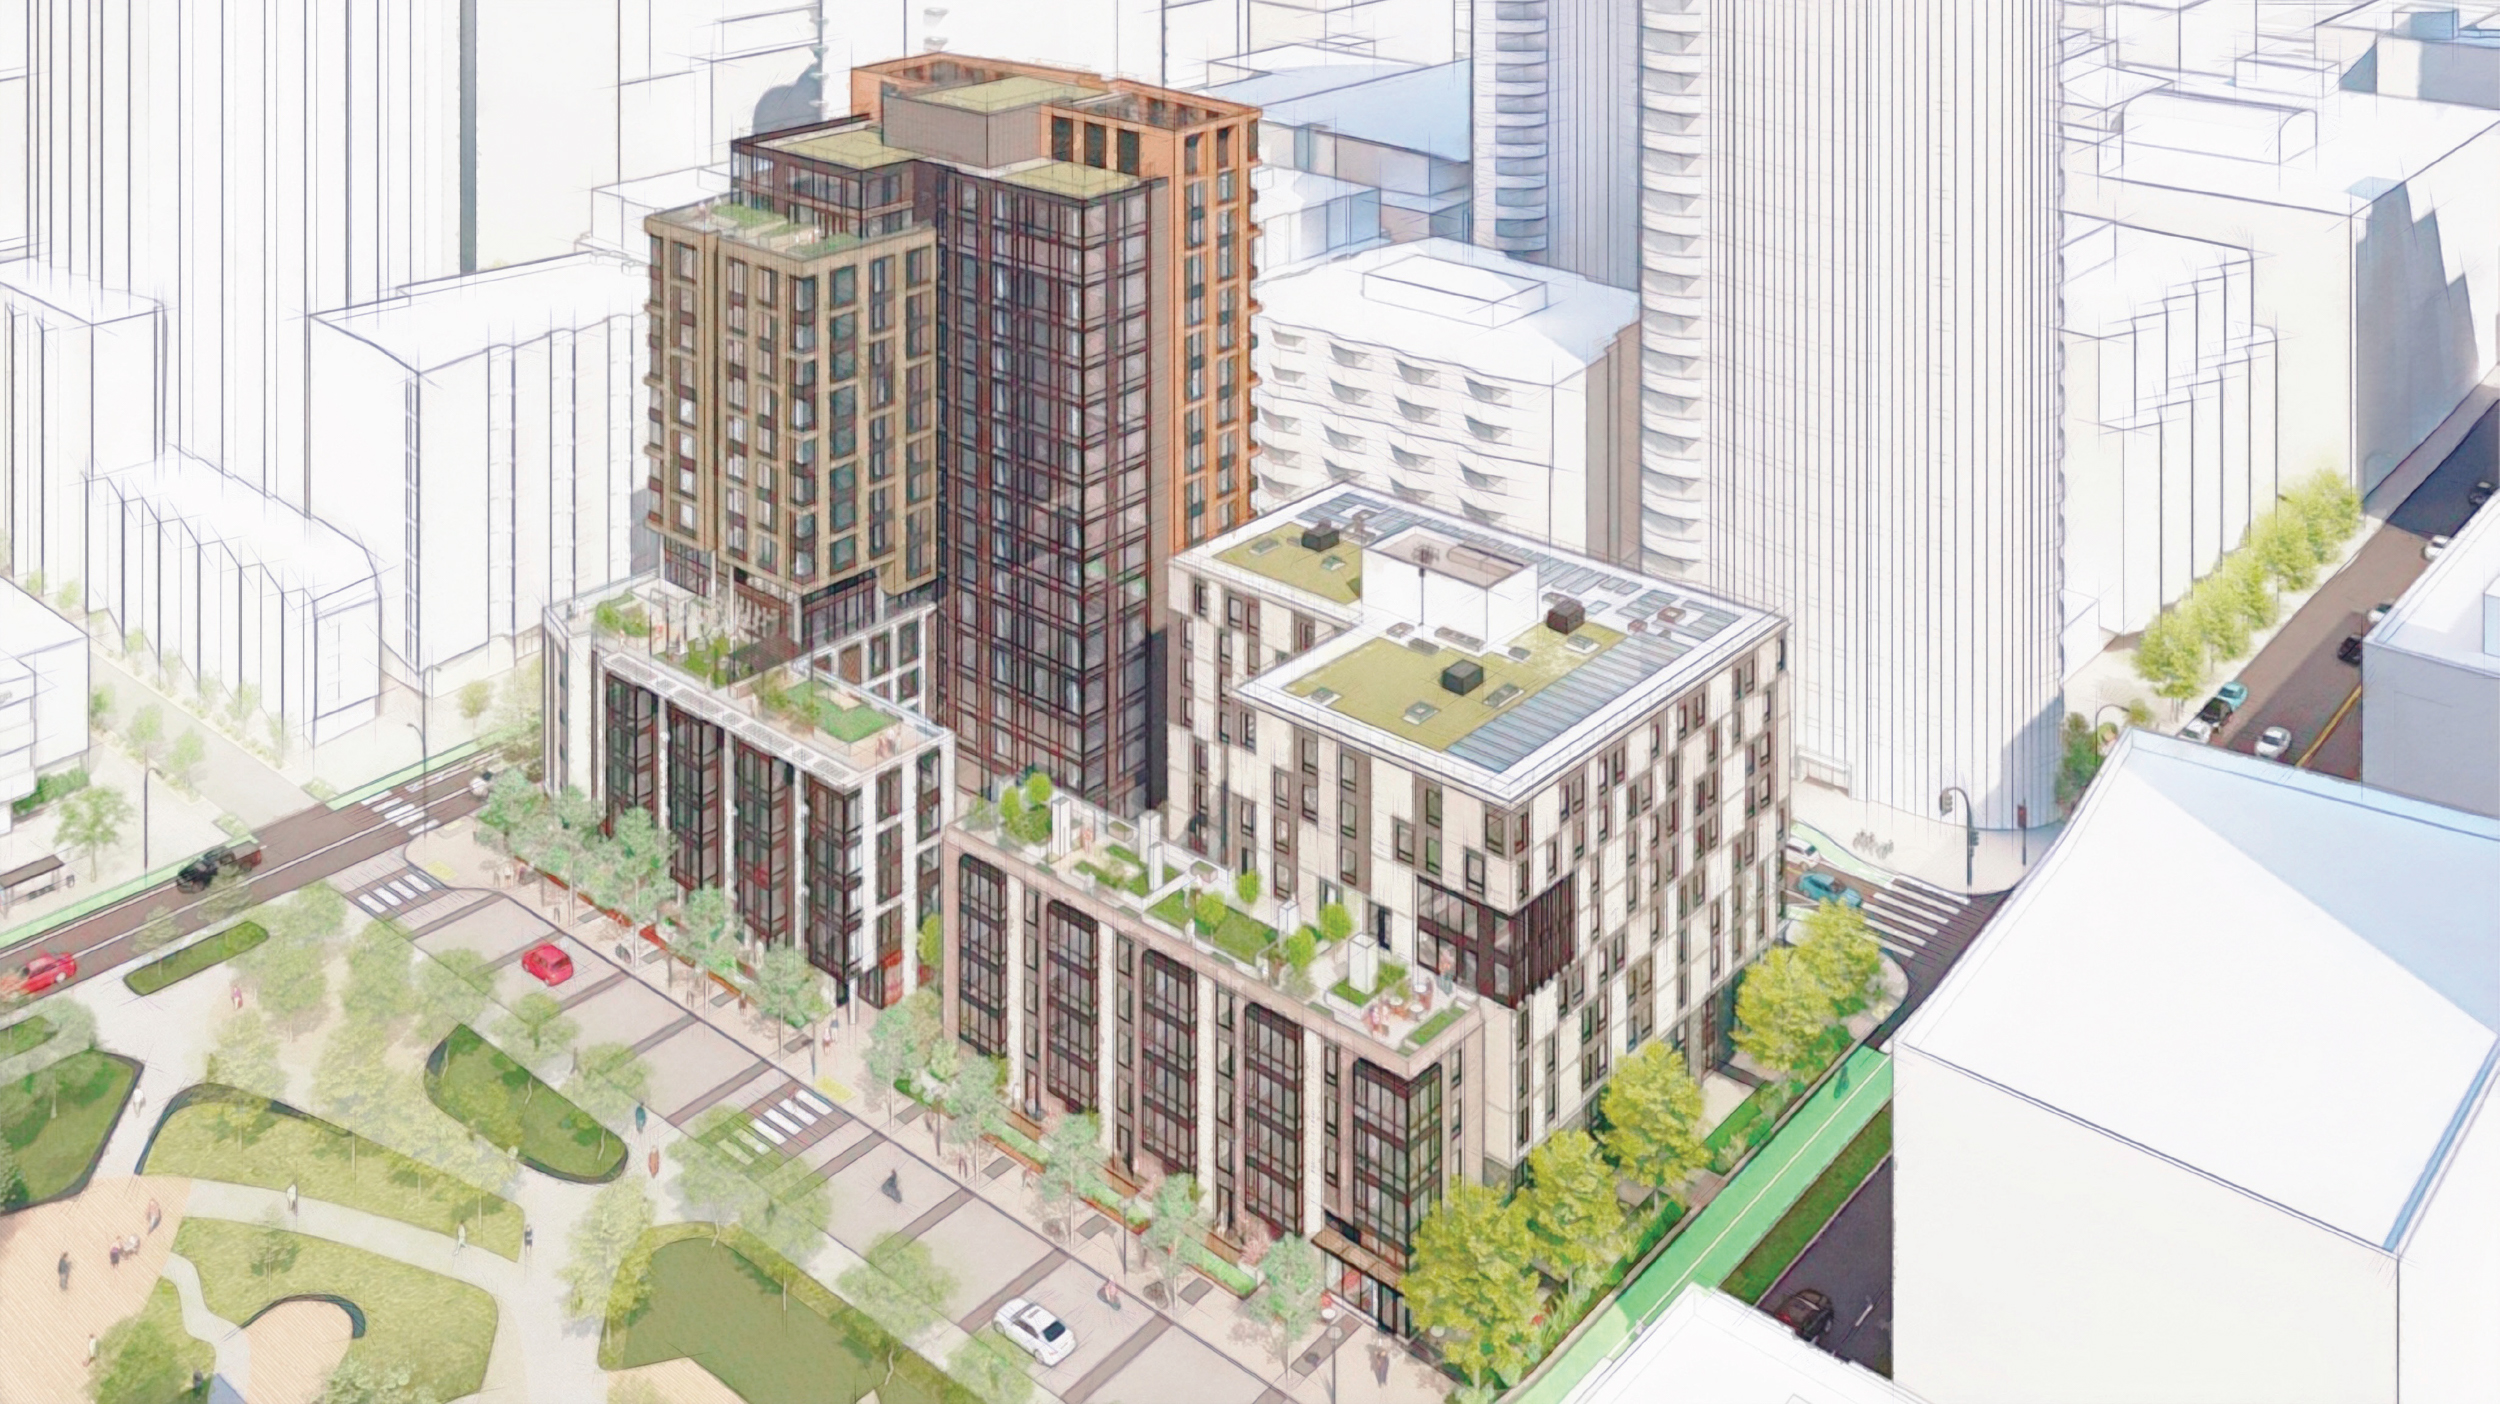 Transbay Block 2 West aerial perspective, rendering by Mithun